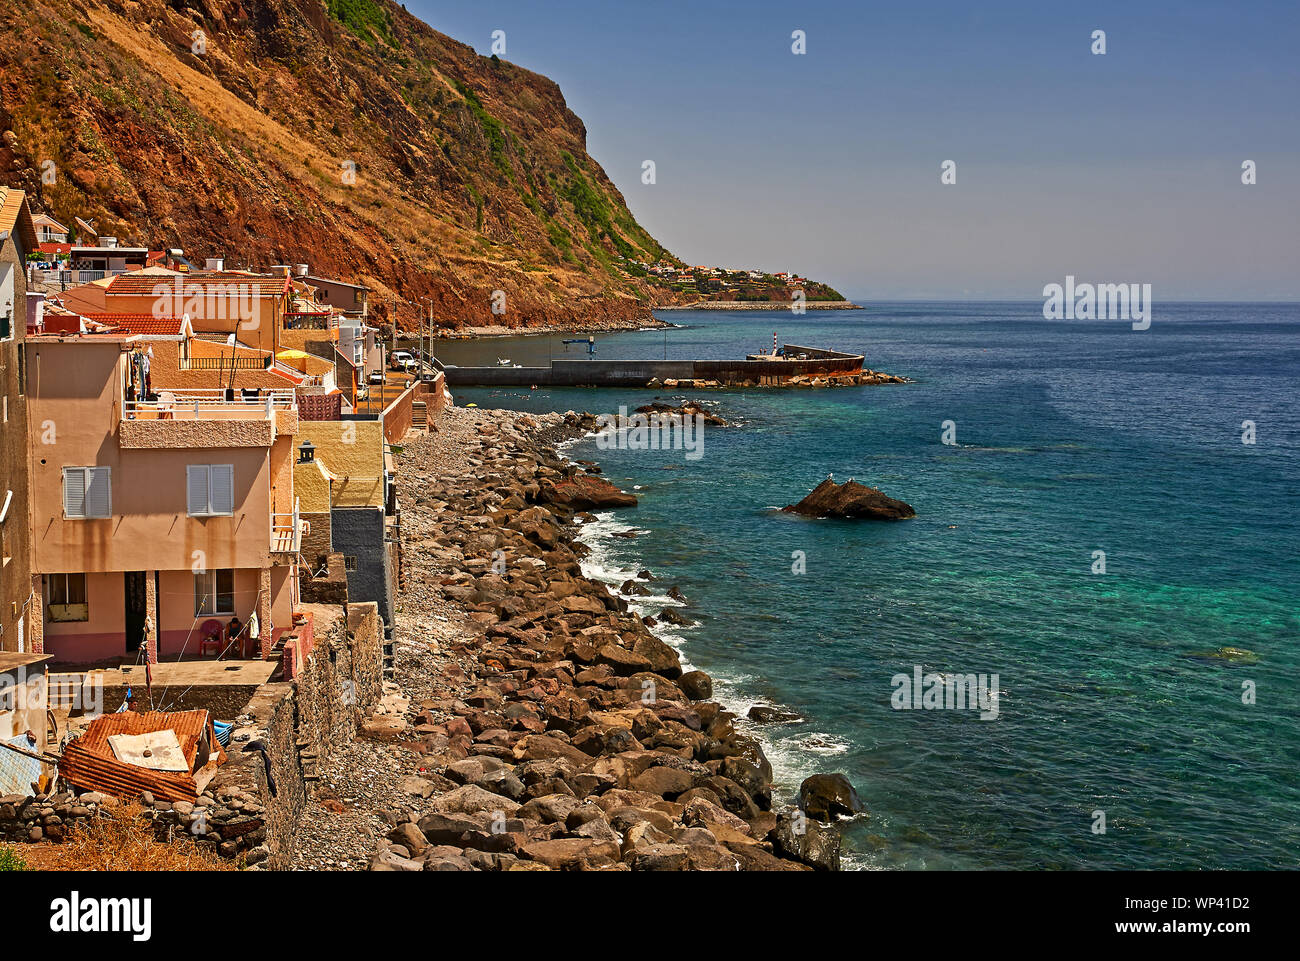 Paul do Mar, Madeira and the rugged coastline of the island is shaped by the Atlantic Ocean. Stock Photo